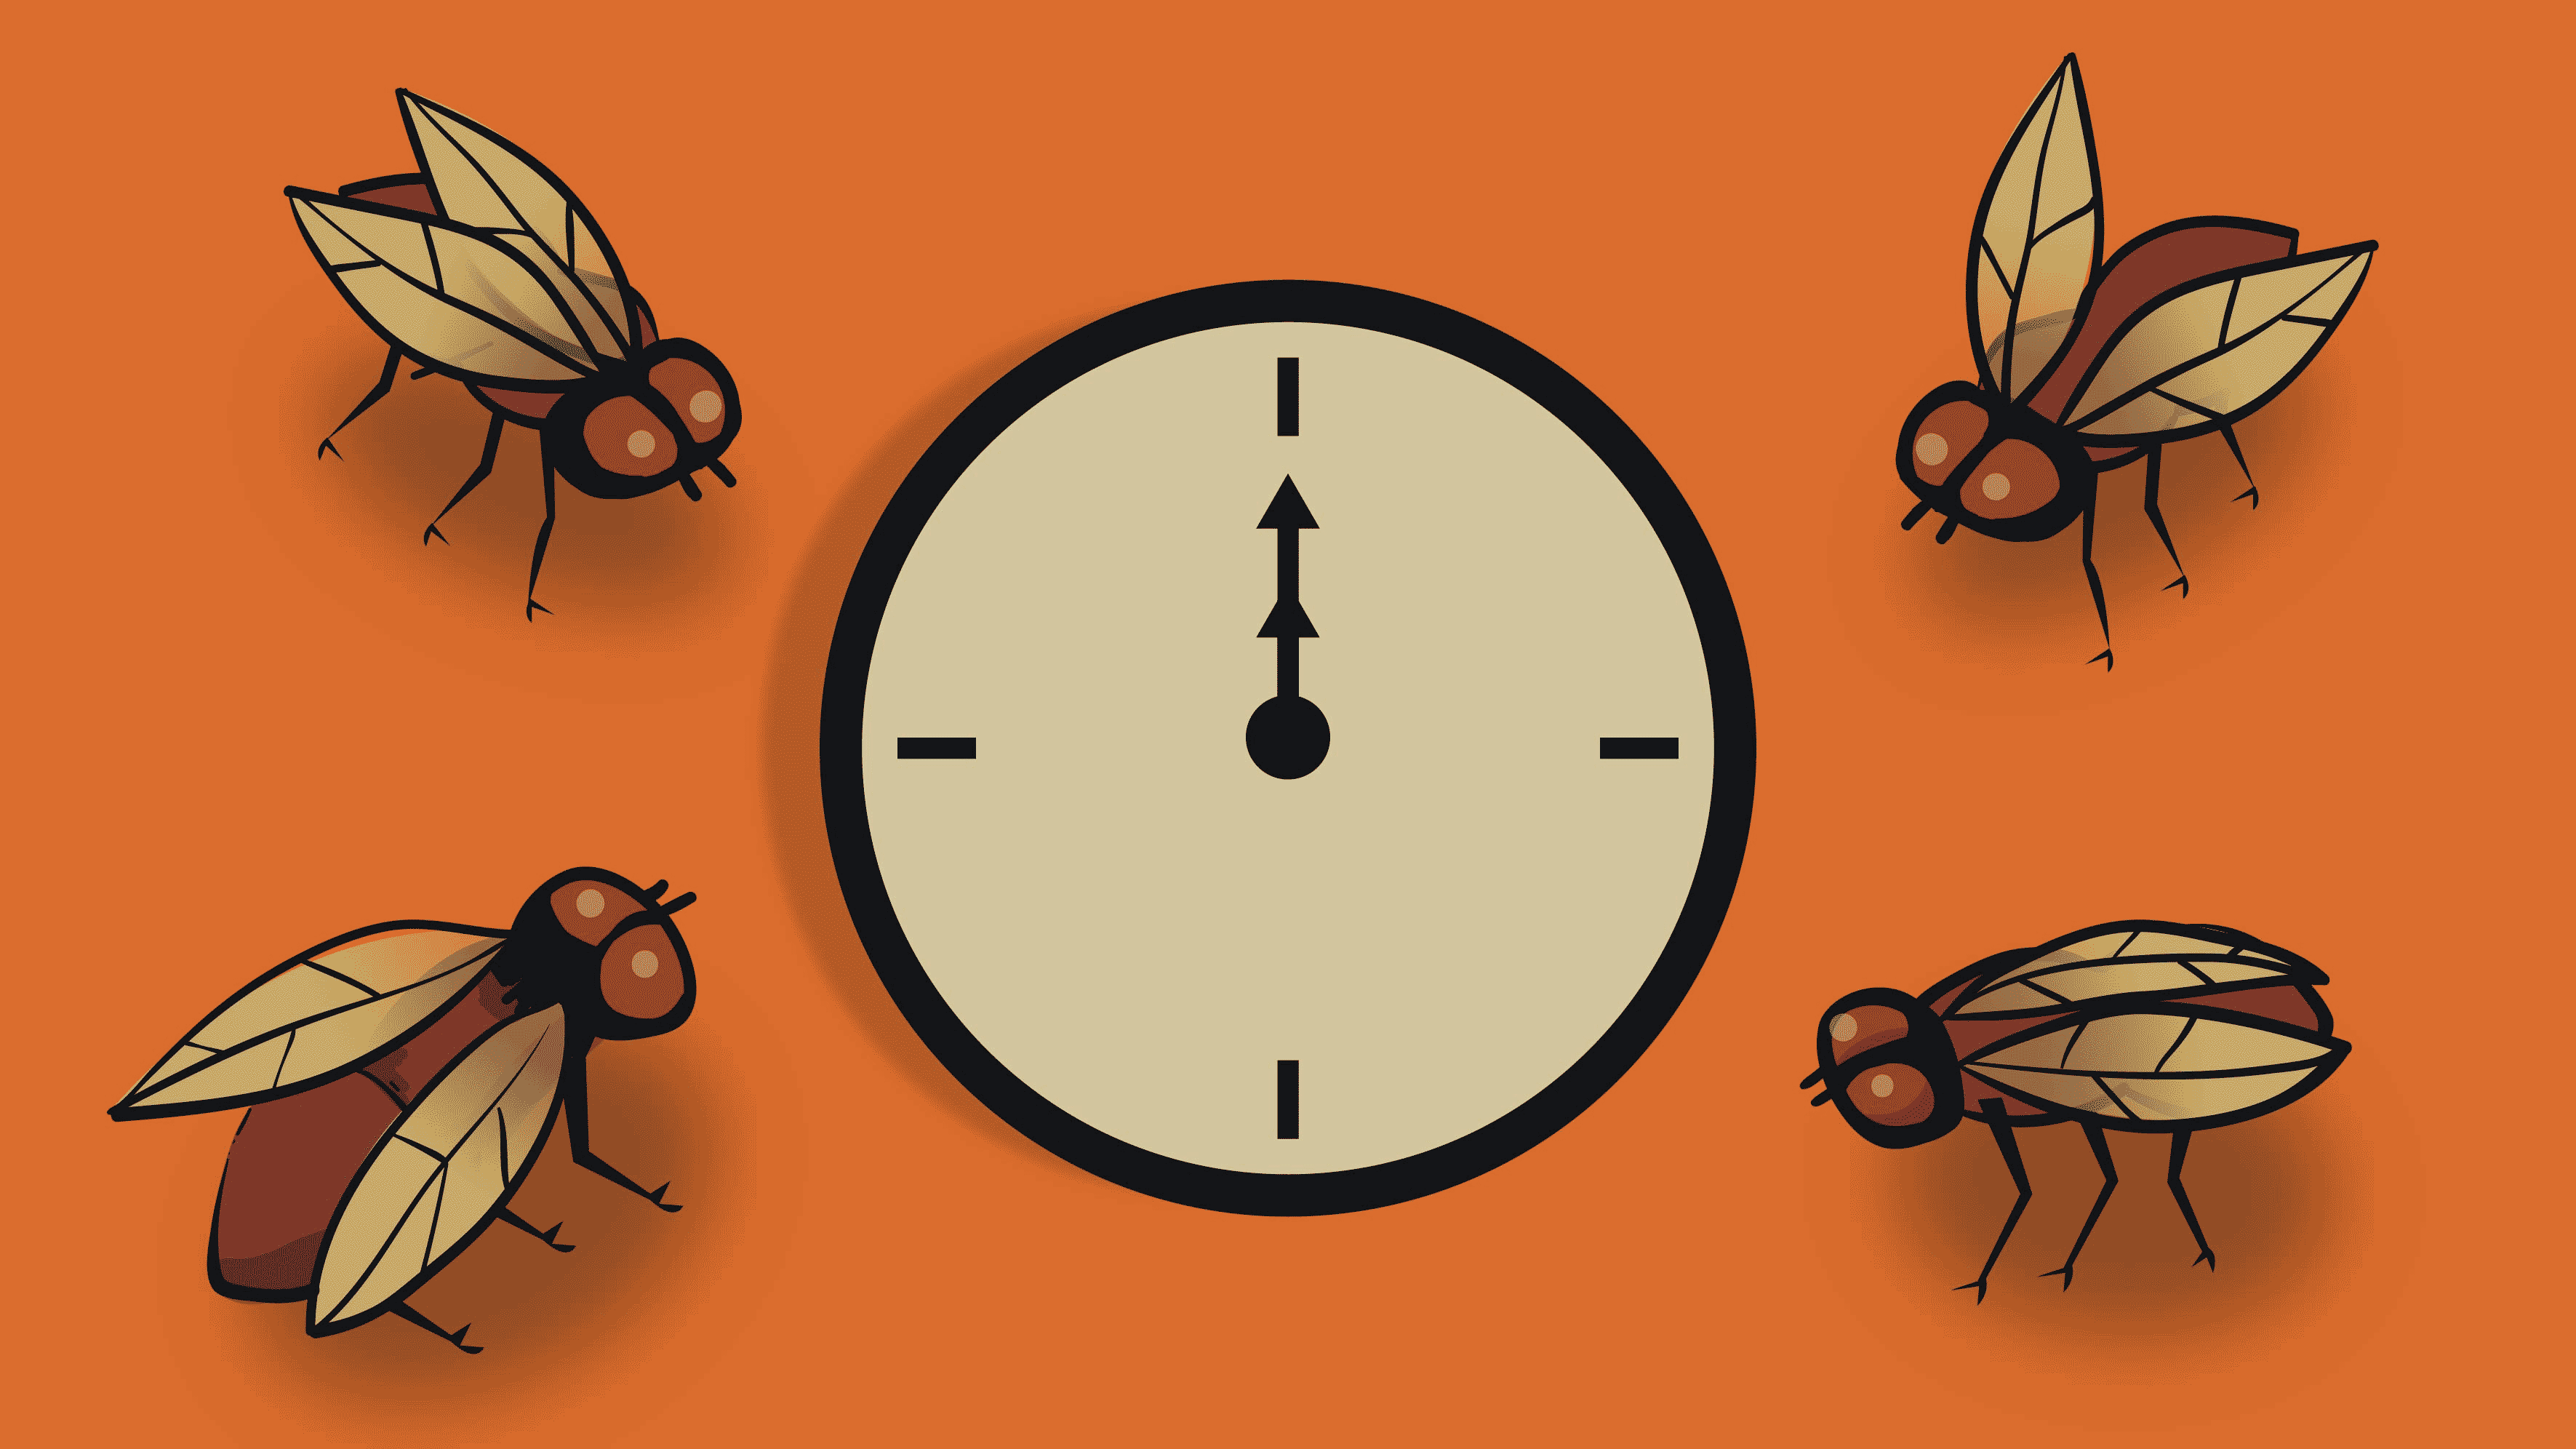 fruit flies around a clock moving in orange and brown 